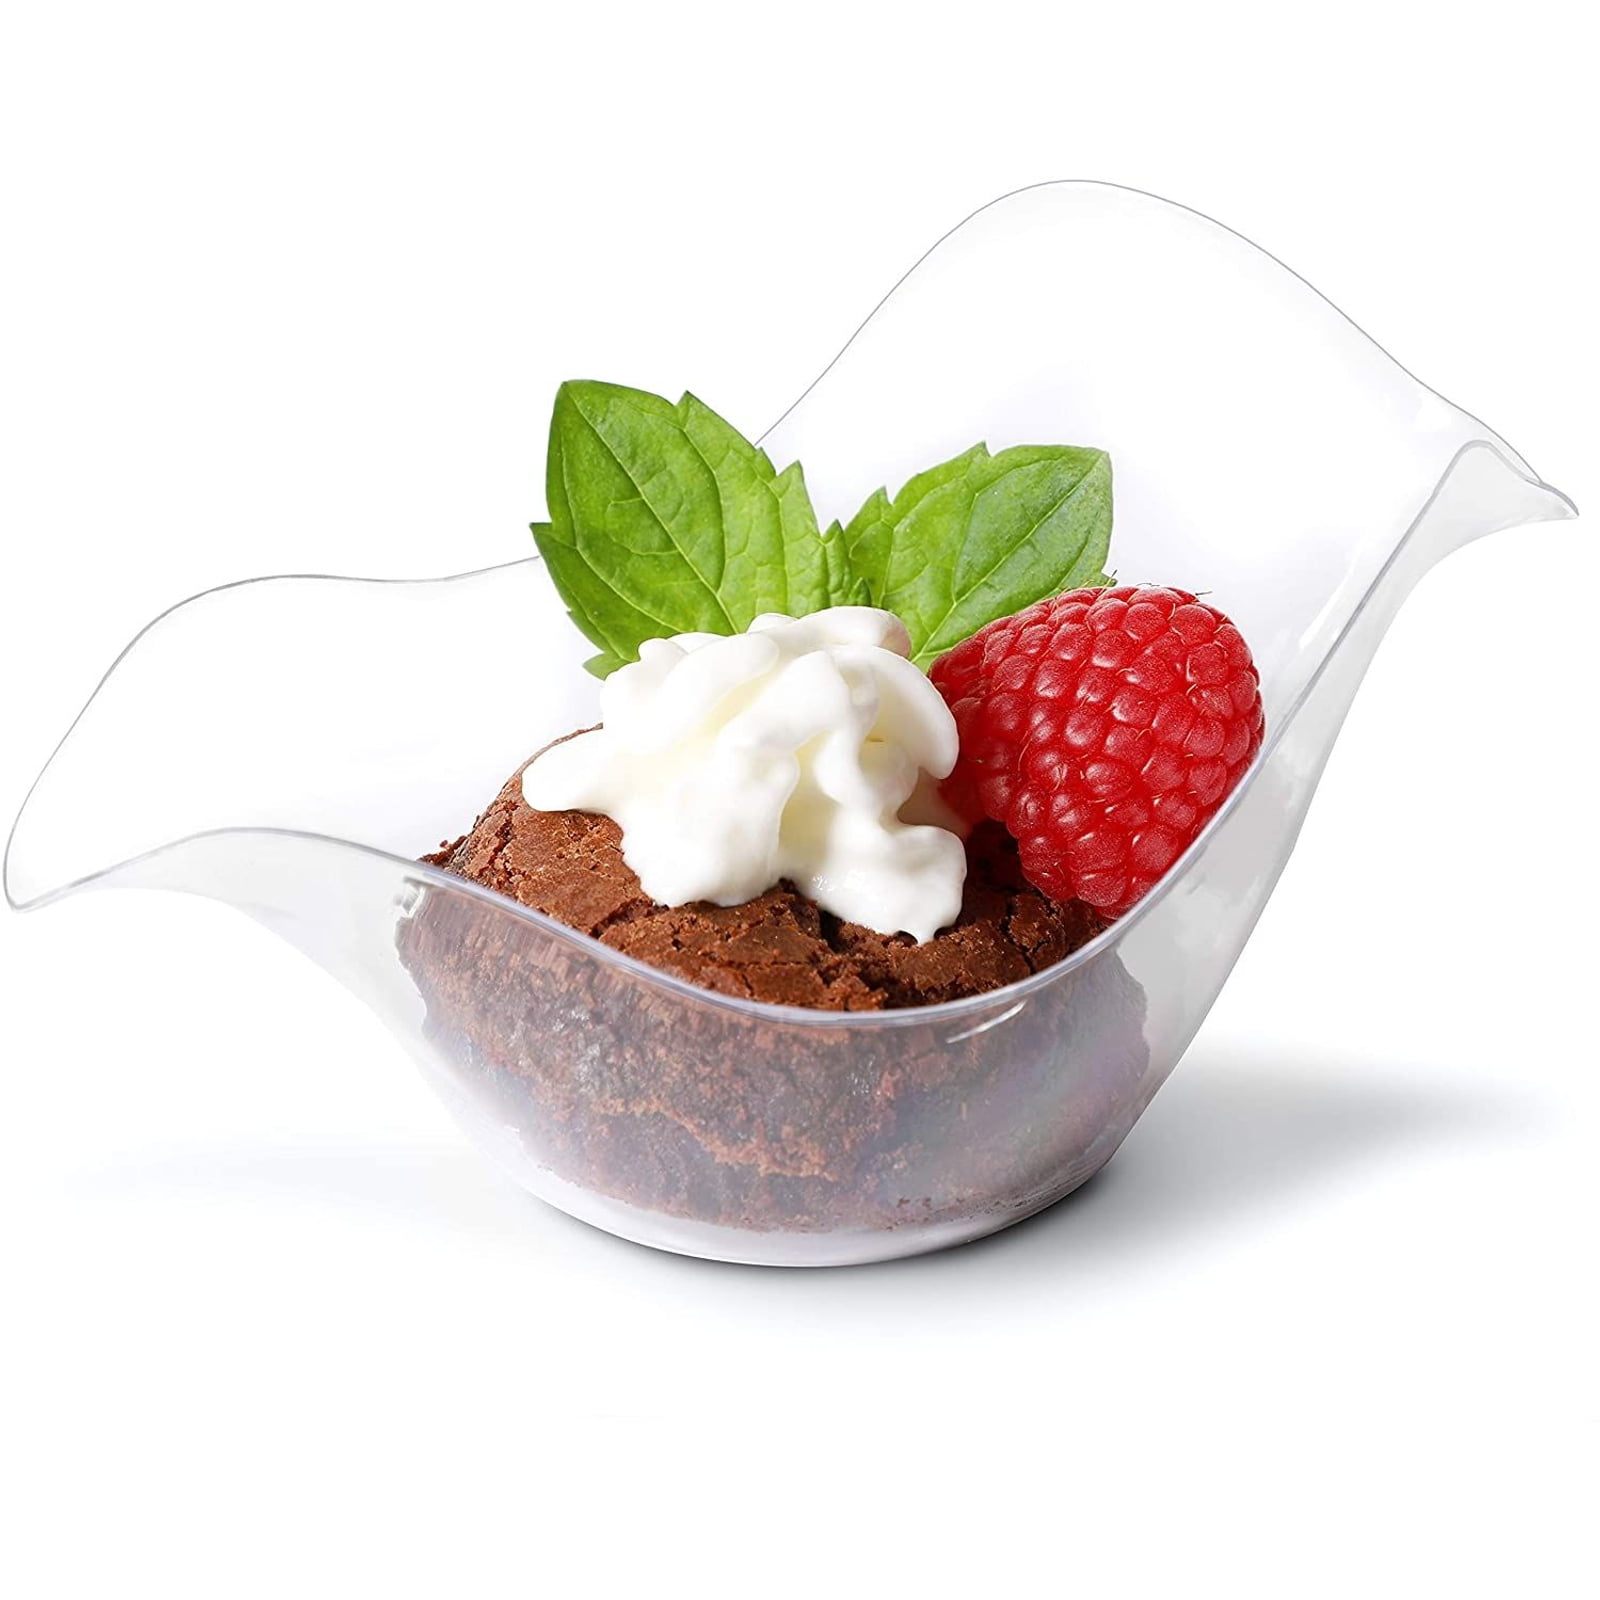 Mini Dessert Bowls - 100-Pack Clear Plastic 1.75-Ounce Appetizer, Salad,  Fruits, Nuts Bowl, Disposable or Reusable Tasting Sampling Party Supplies,  Catering, Buffet, Food Display, 4 x 2.5 x 2 Inches 